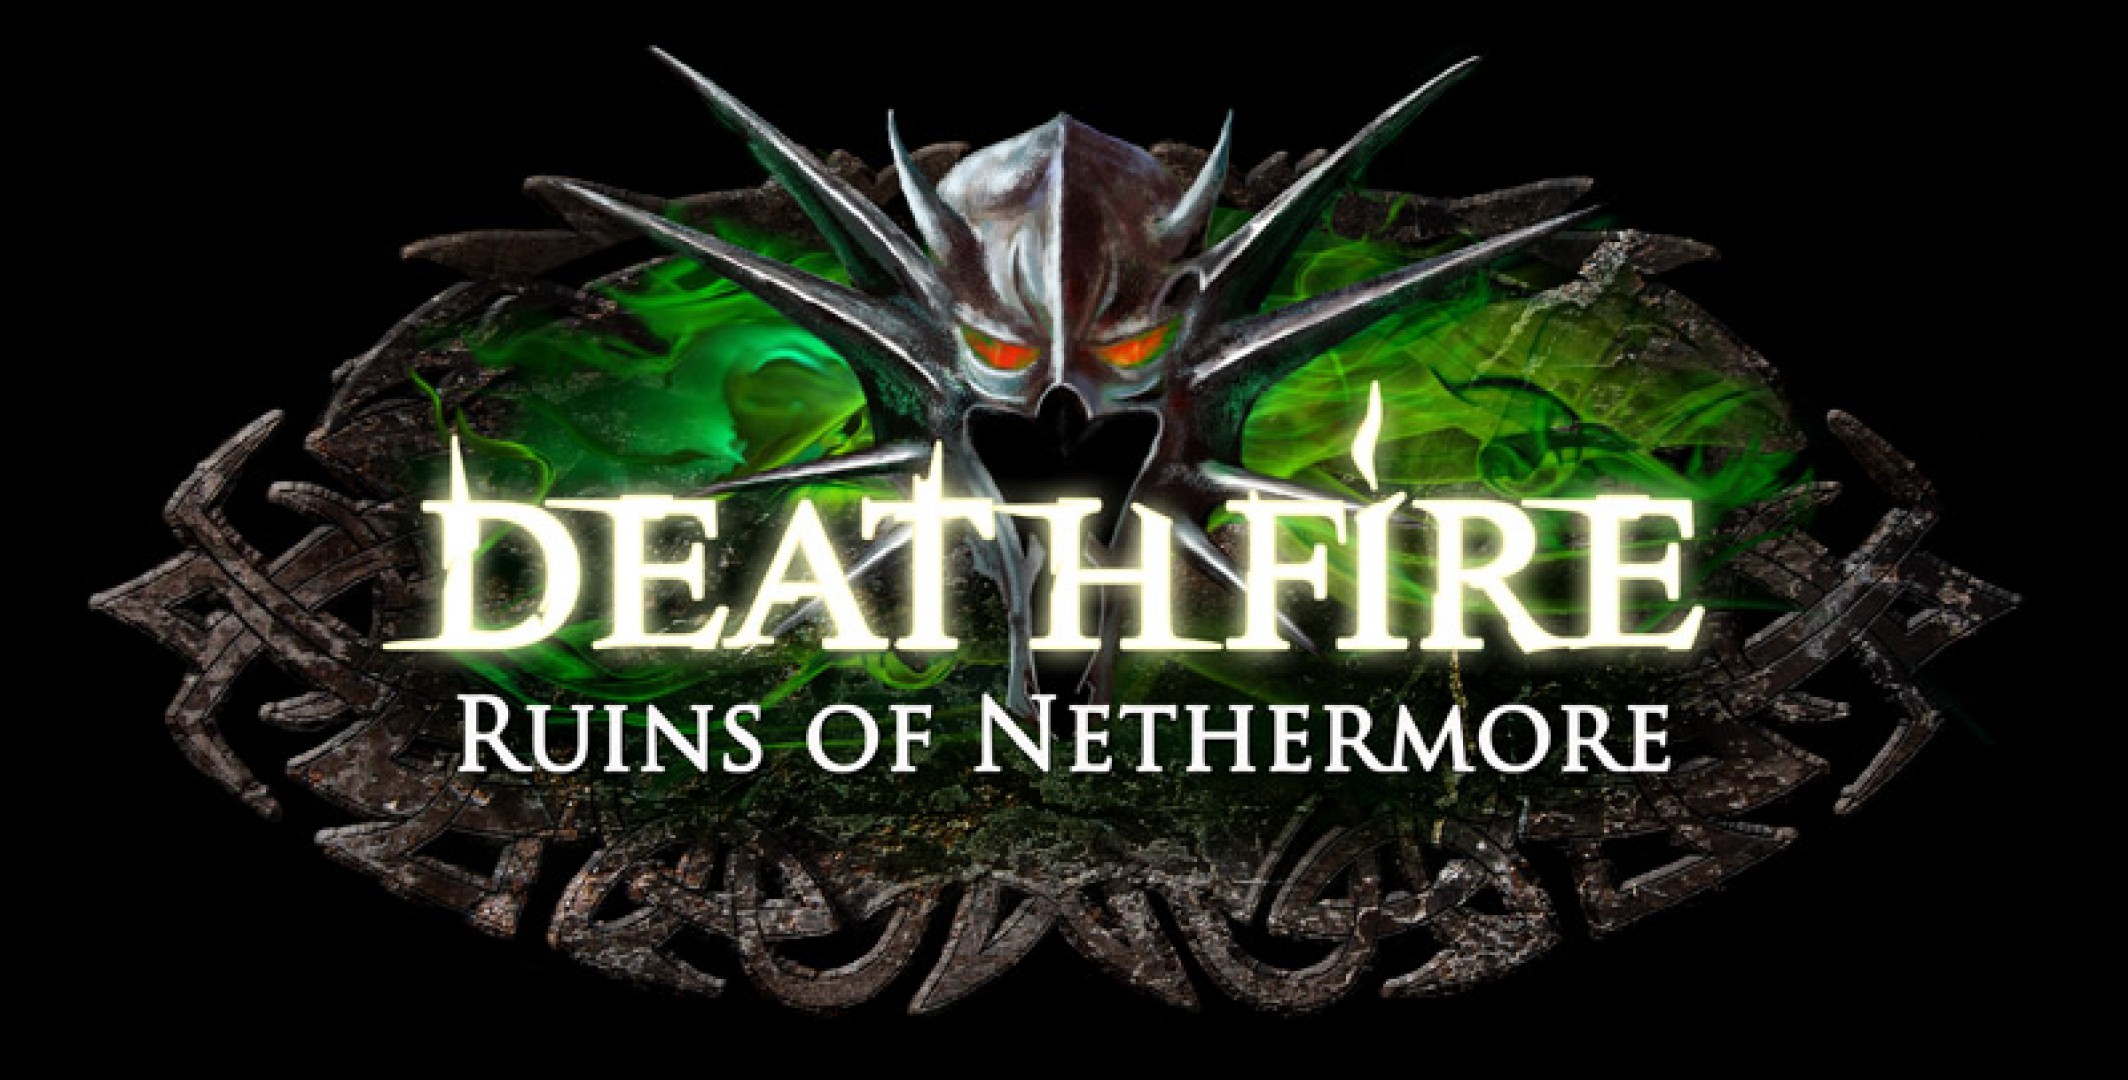 Pc Deathfire Ruins Of Nethermore The Schworak Site - how to get deluxe for free unlimited cash roblox obstacle paradise